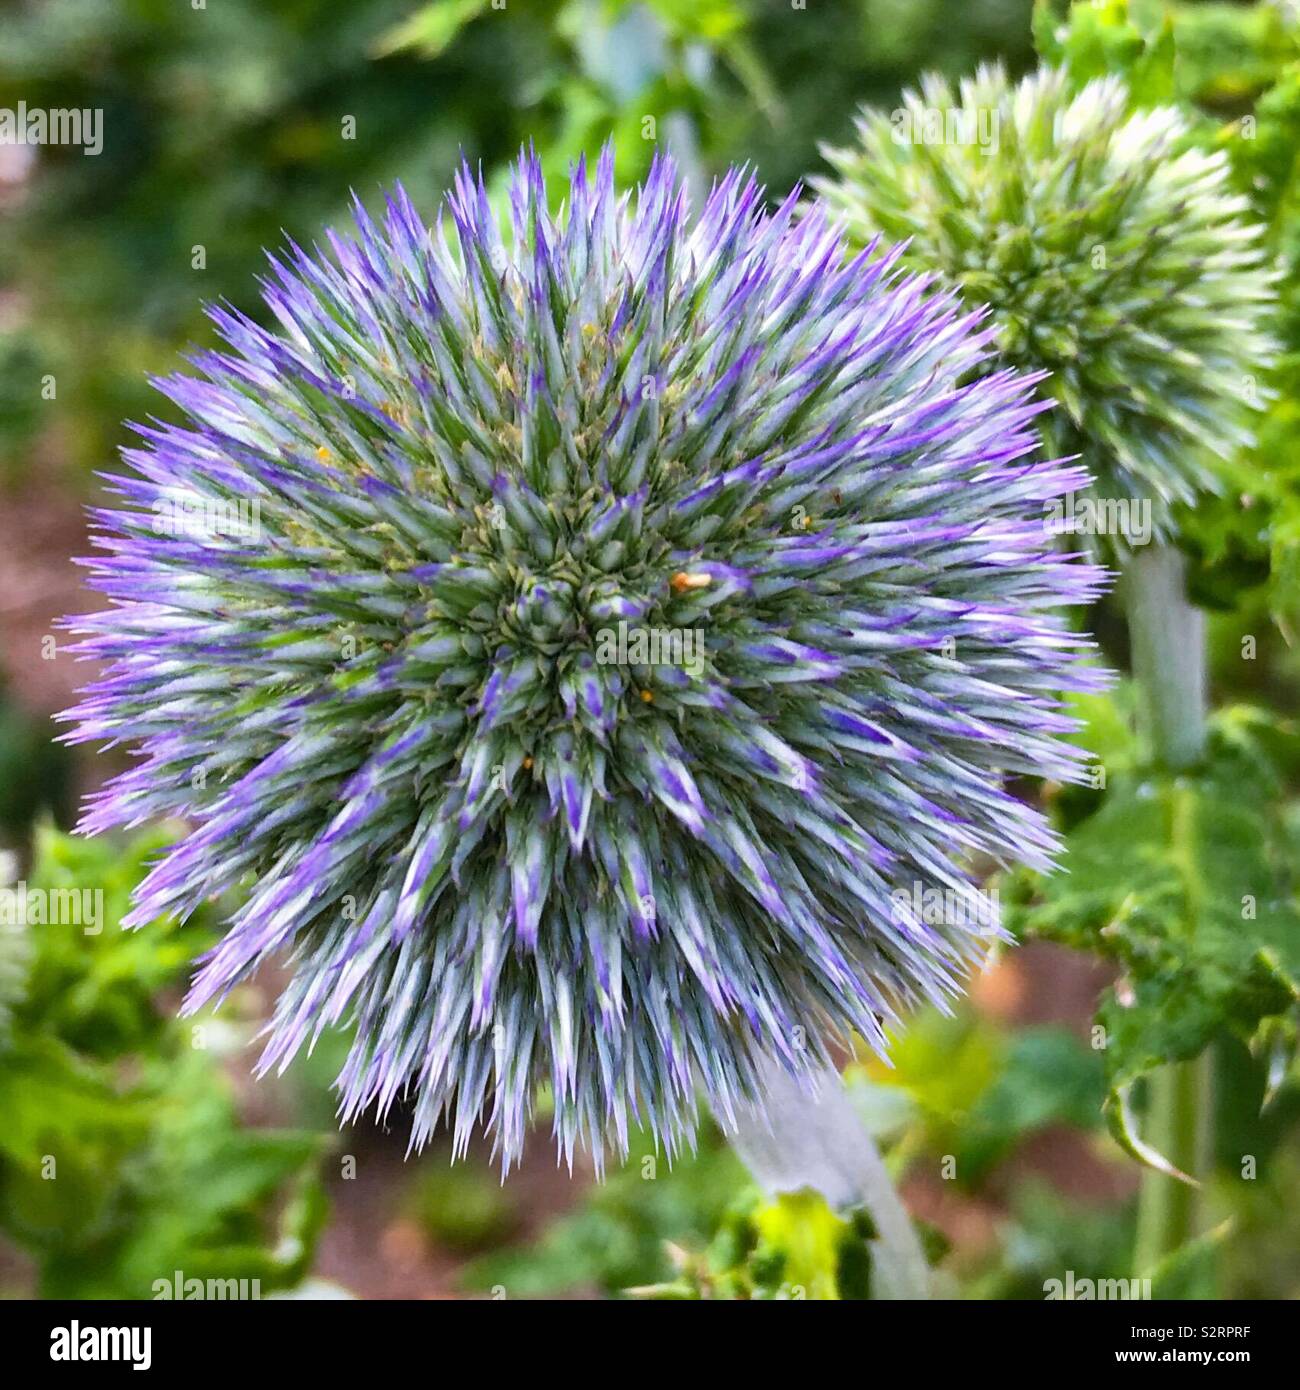 Purple thistle in the foreground with a green thistle in the background Stock Photo